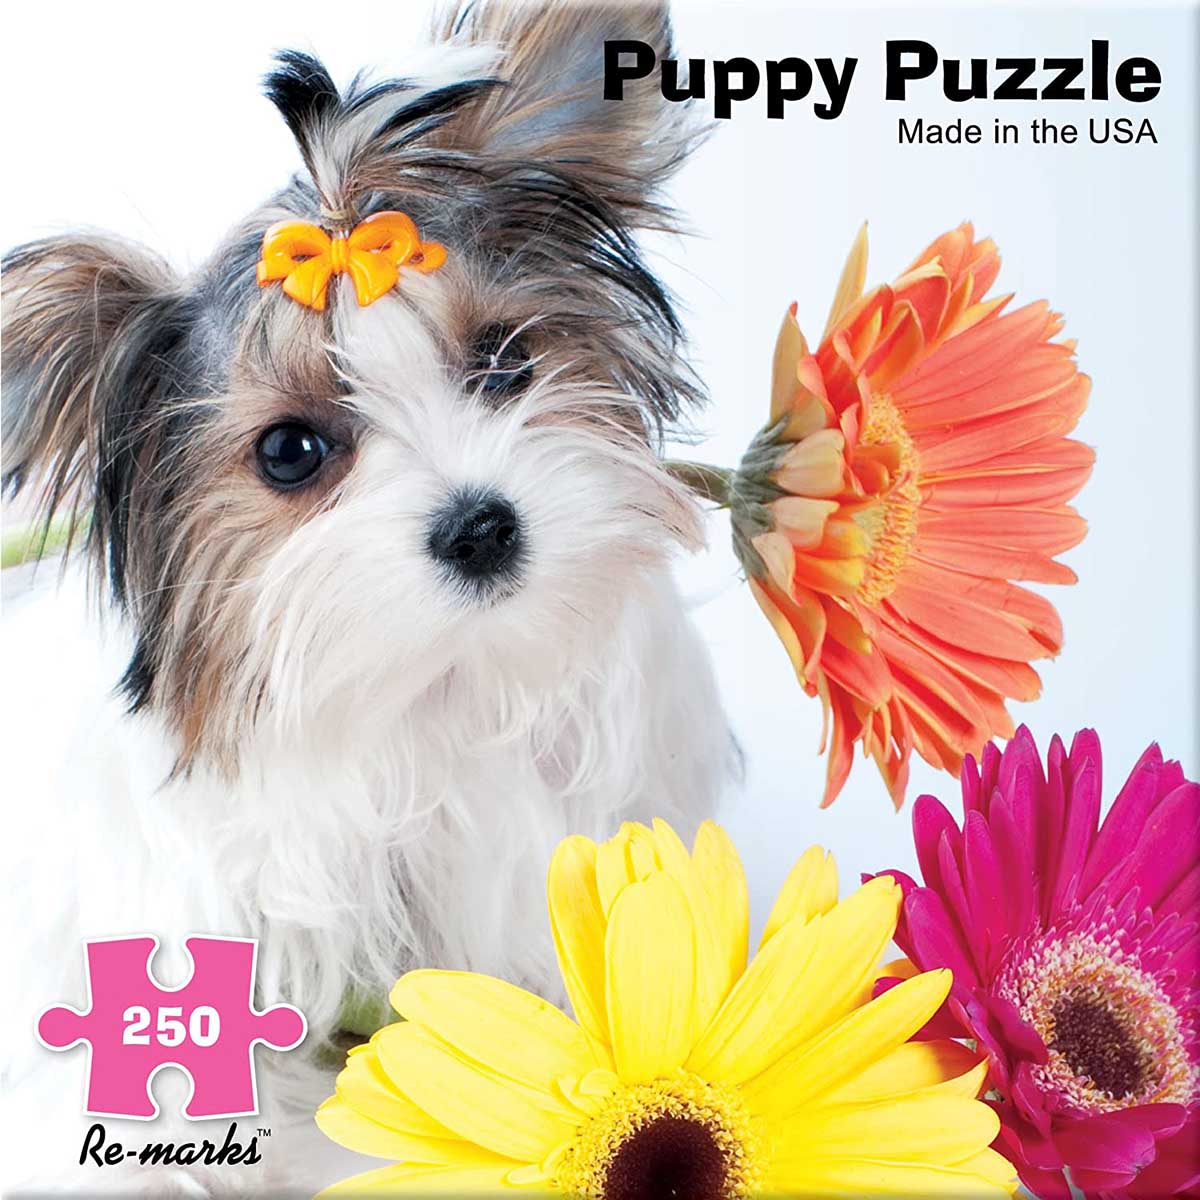 A Friend In Need Humor Wooden Jigsaw Puzzle By Victory Wooden Puzzles, LTD